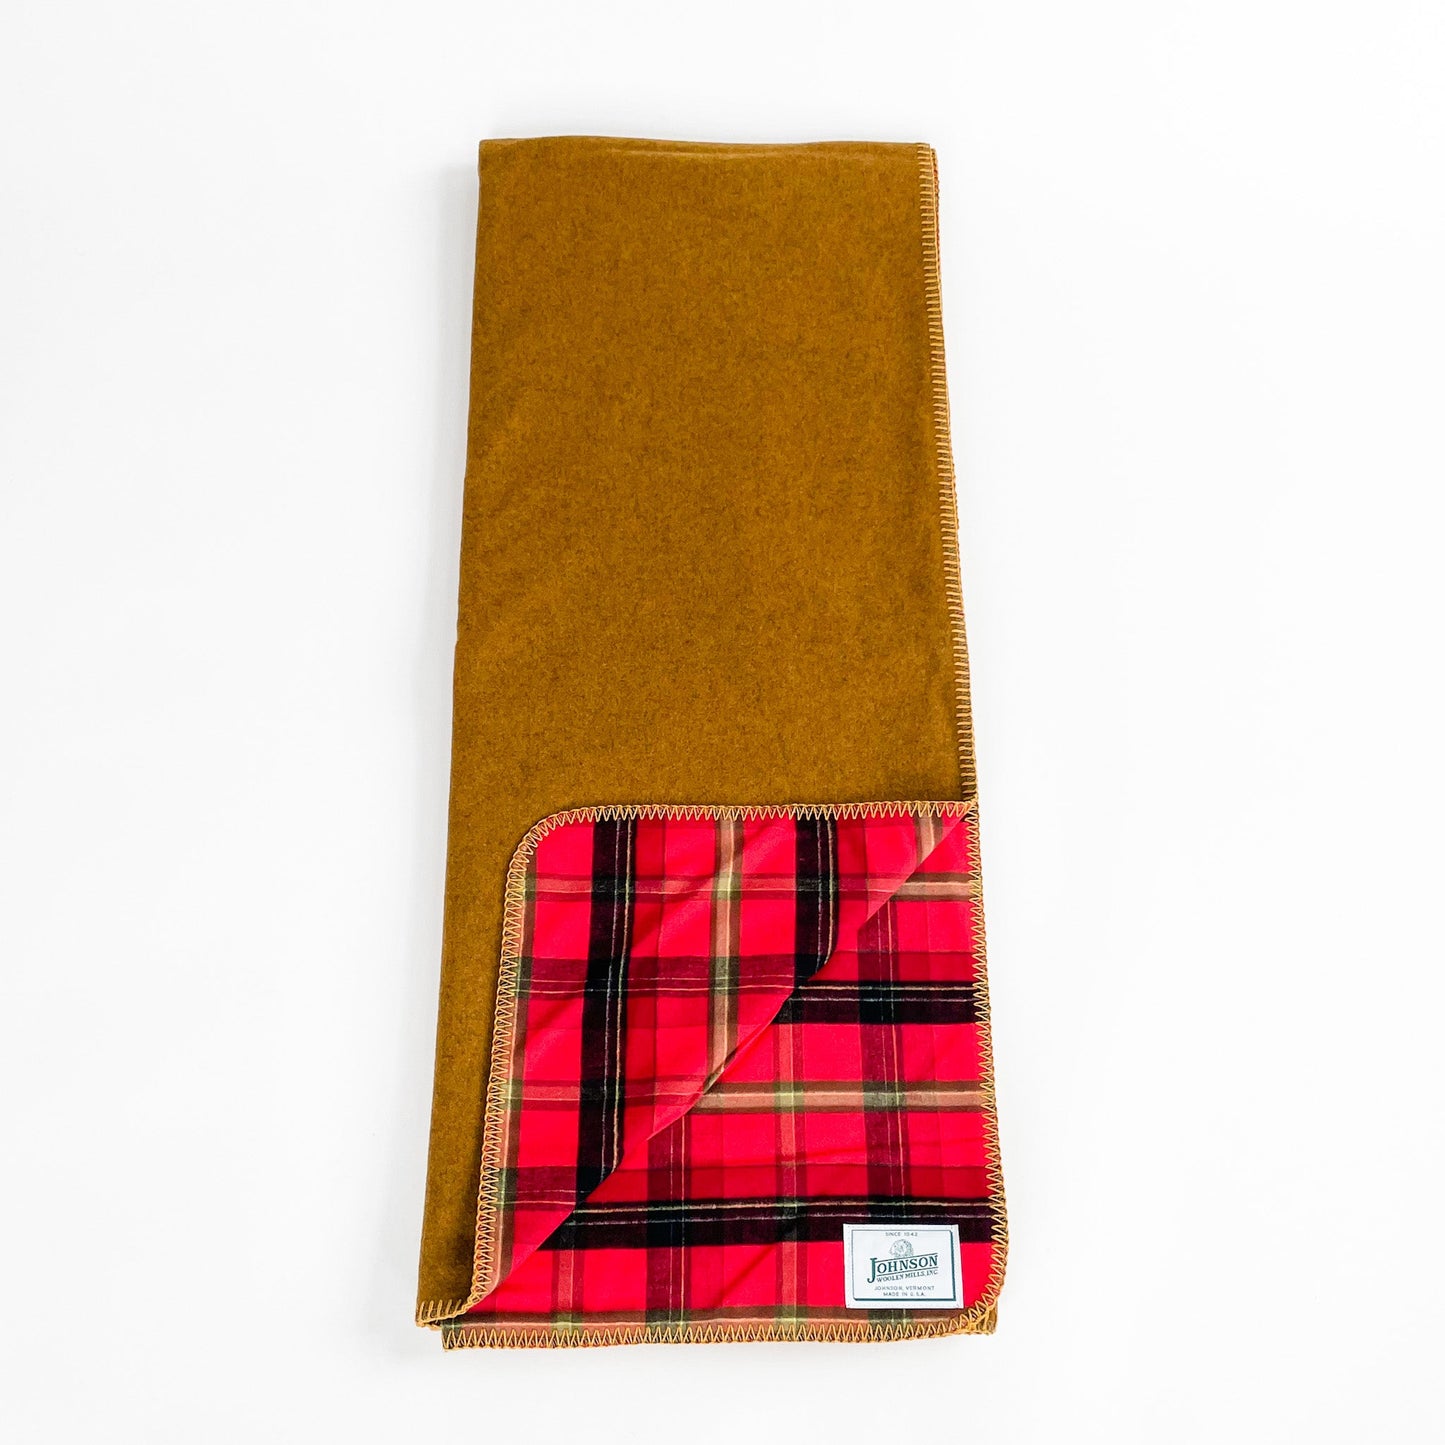 Flannel Wool Throws, butterscotch wool outside, flannel red/orange/ yellow inside, front view opened